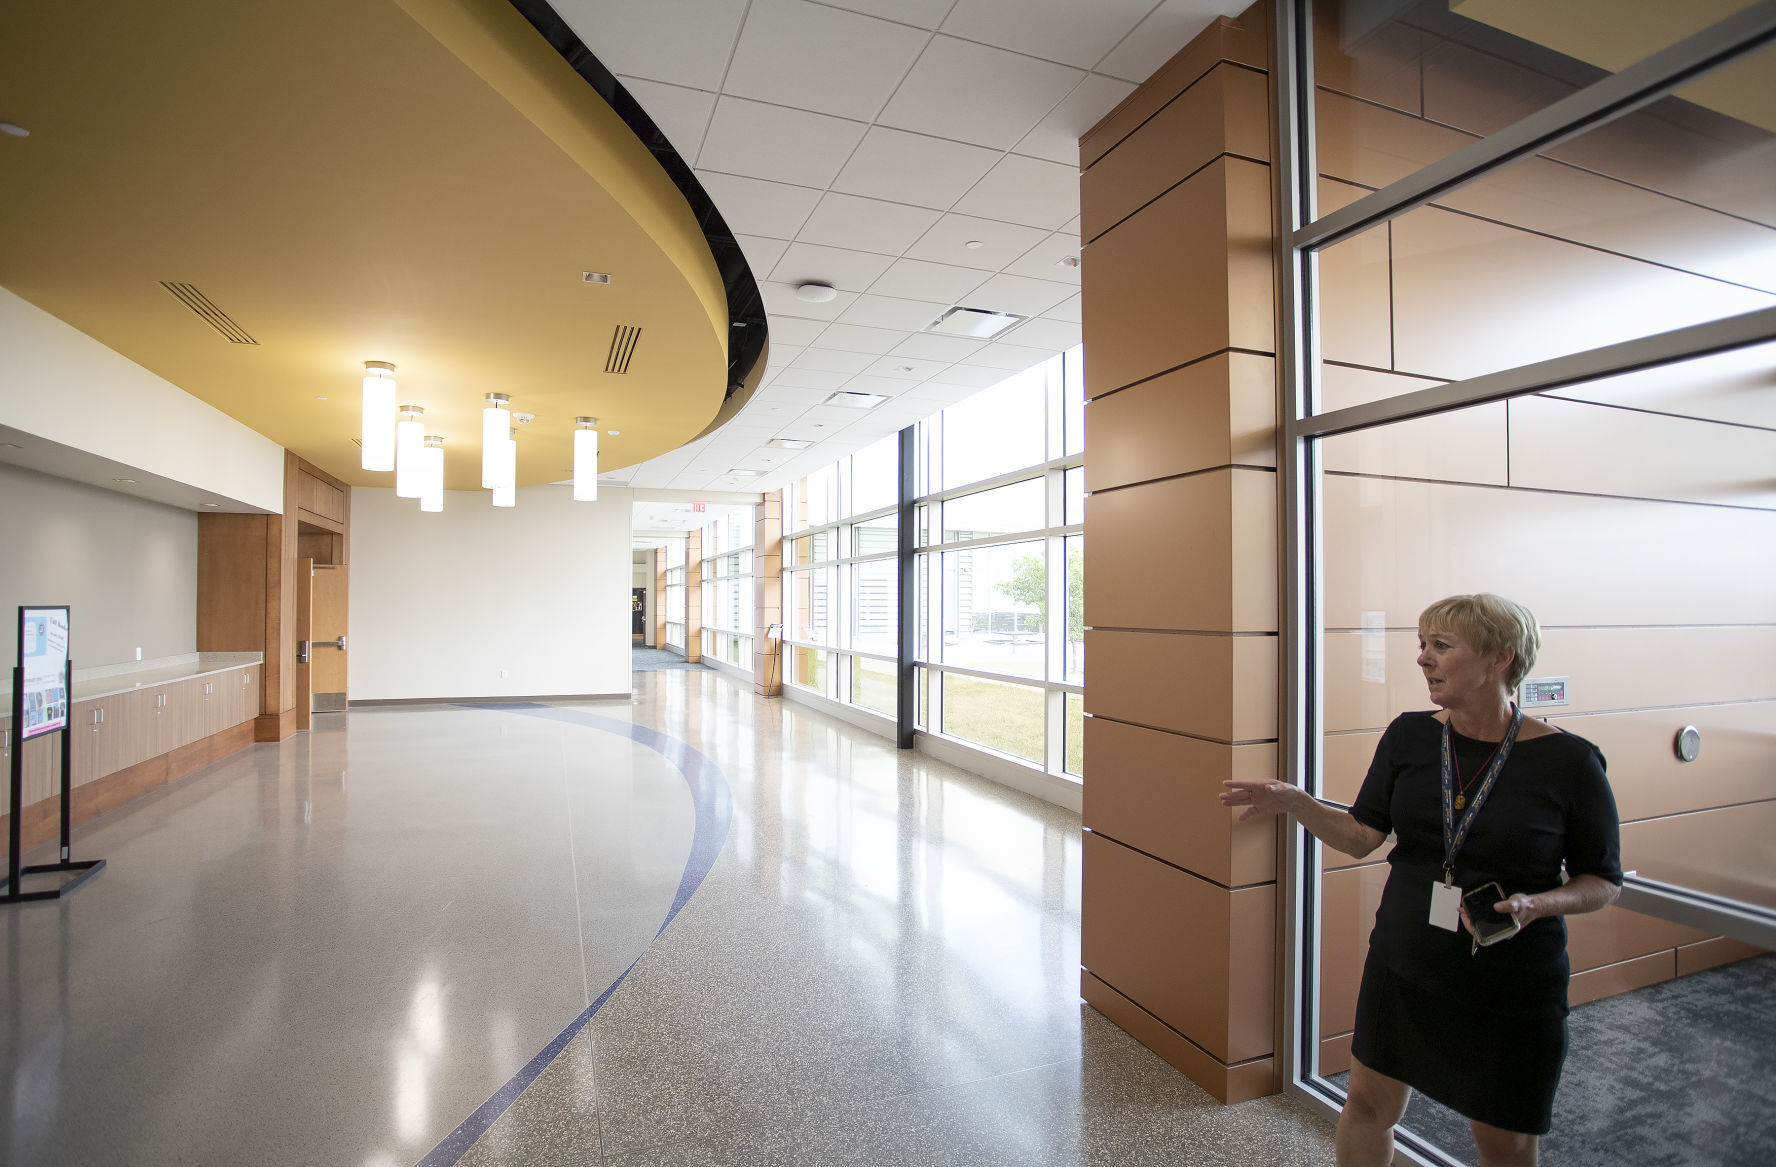 Associate Vice President of Operations Rhonda Seibert gives a tour of the recent renovations to the NICC campus in Peosta, Iowa, on Monday.    PHOTO CREDIT: Stephen Gassman